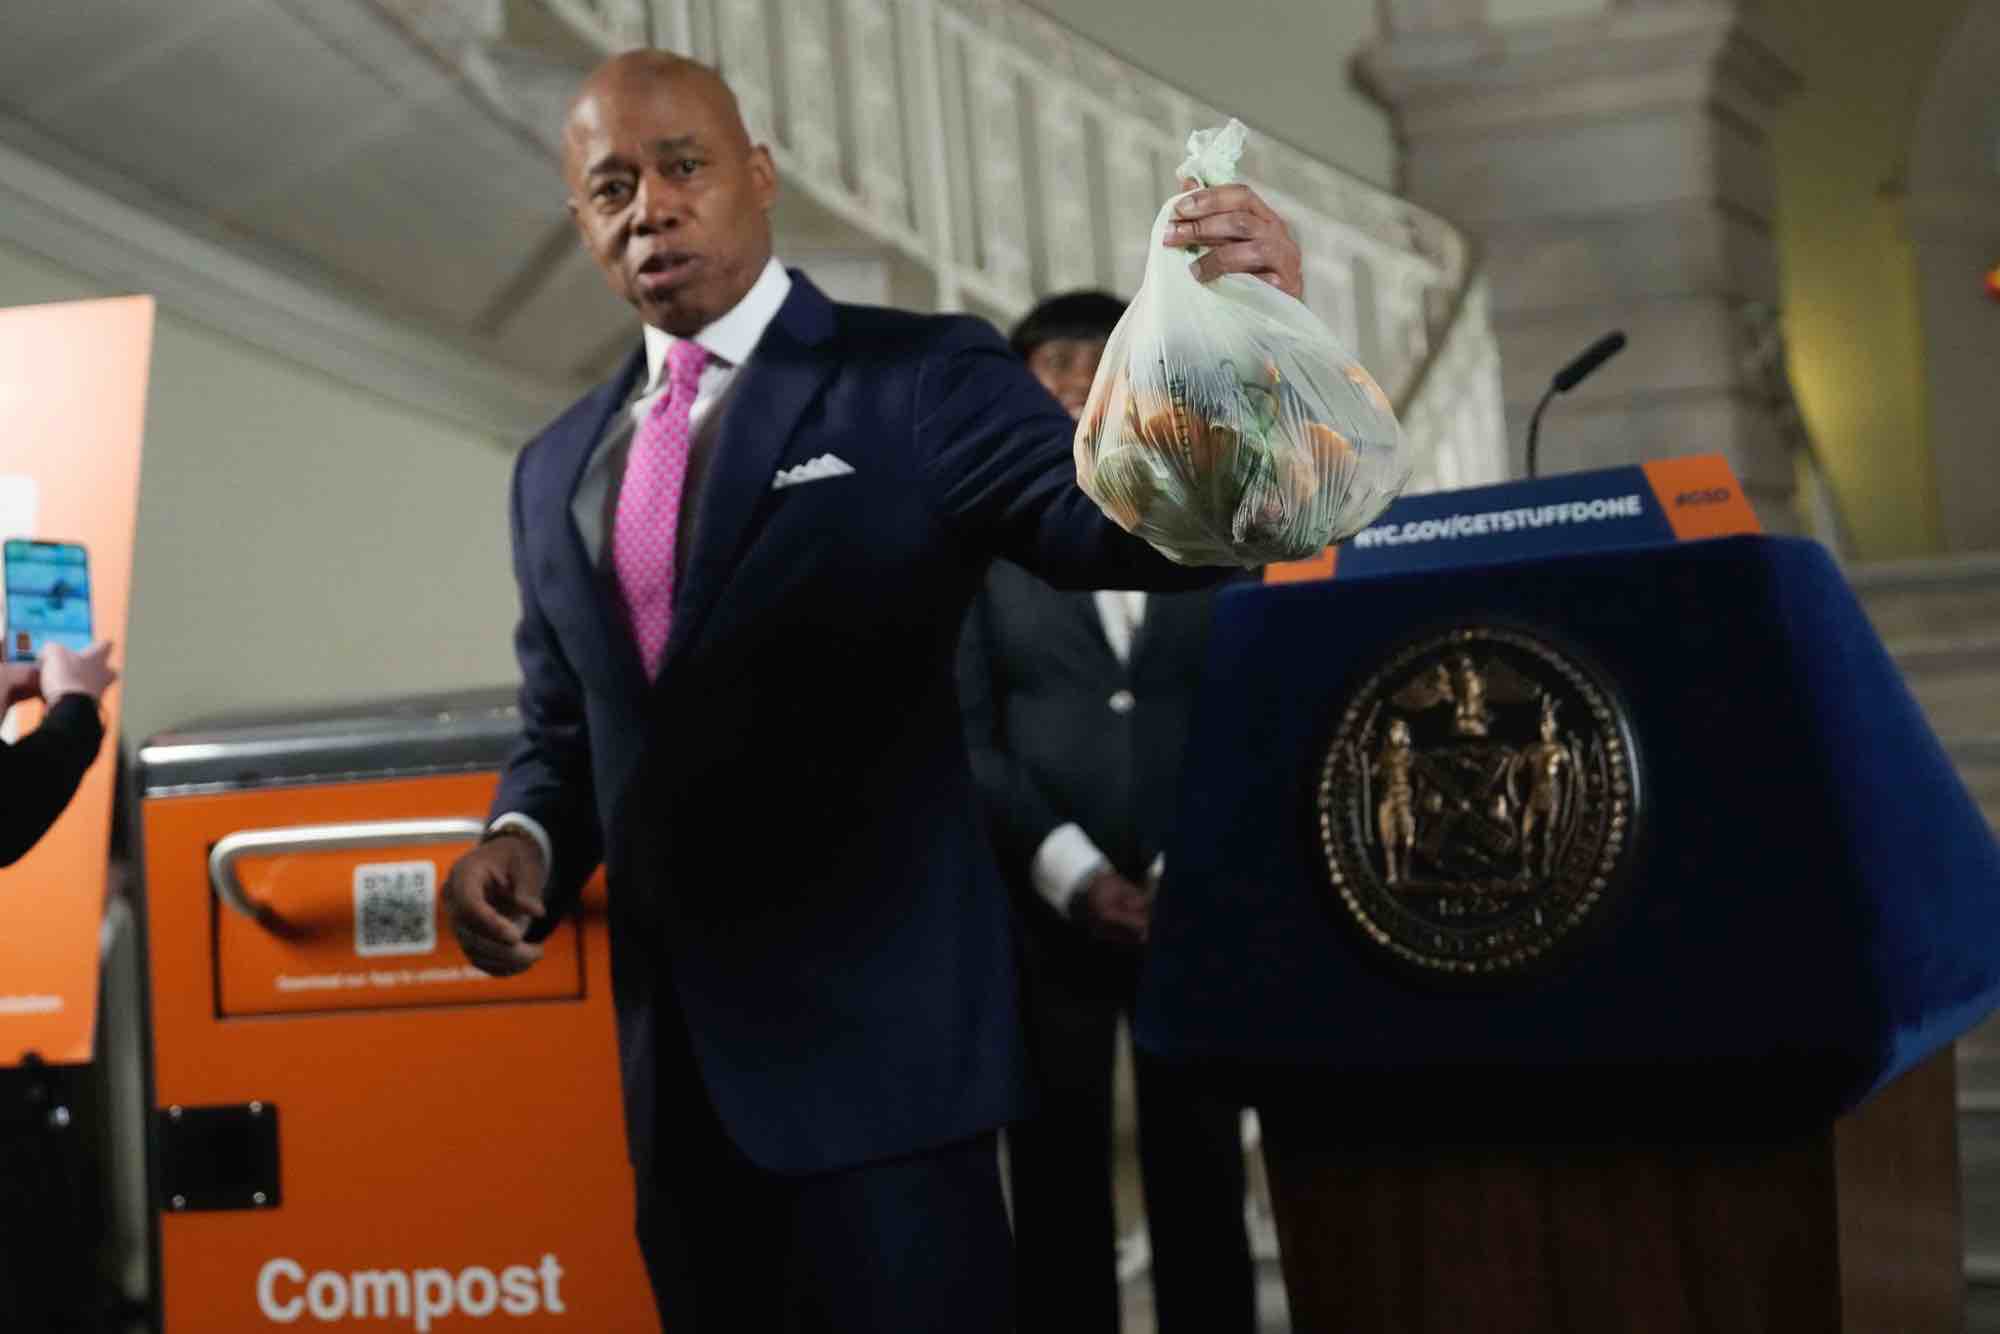 Mayor Adams holds a bag of compost before he tosses it into a new NYC Composting bin at City Hall.